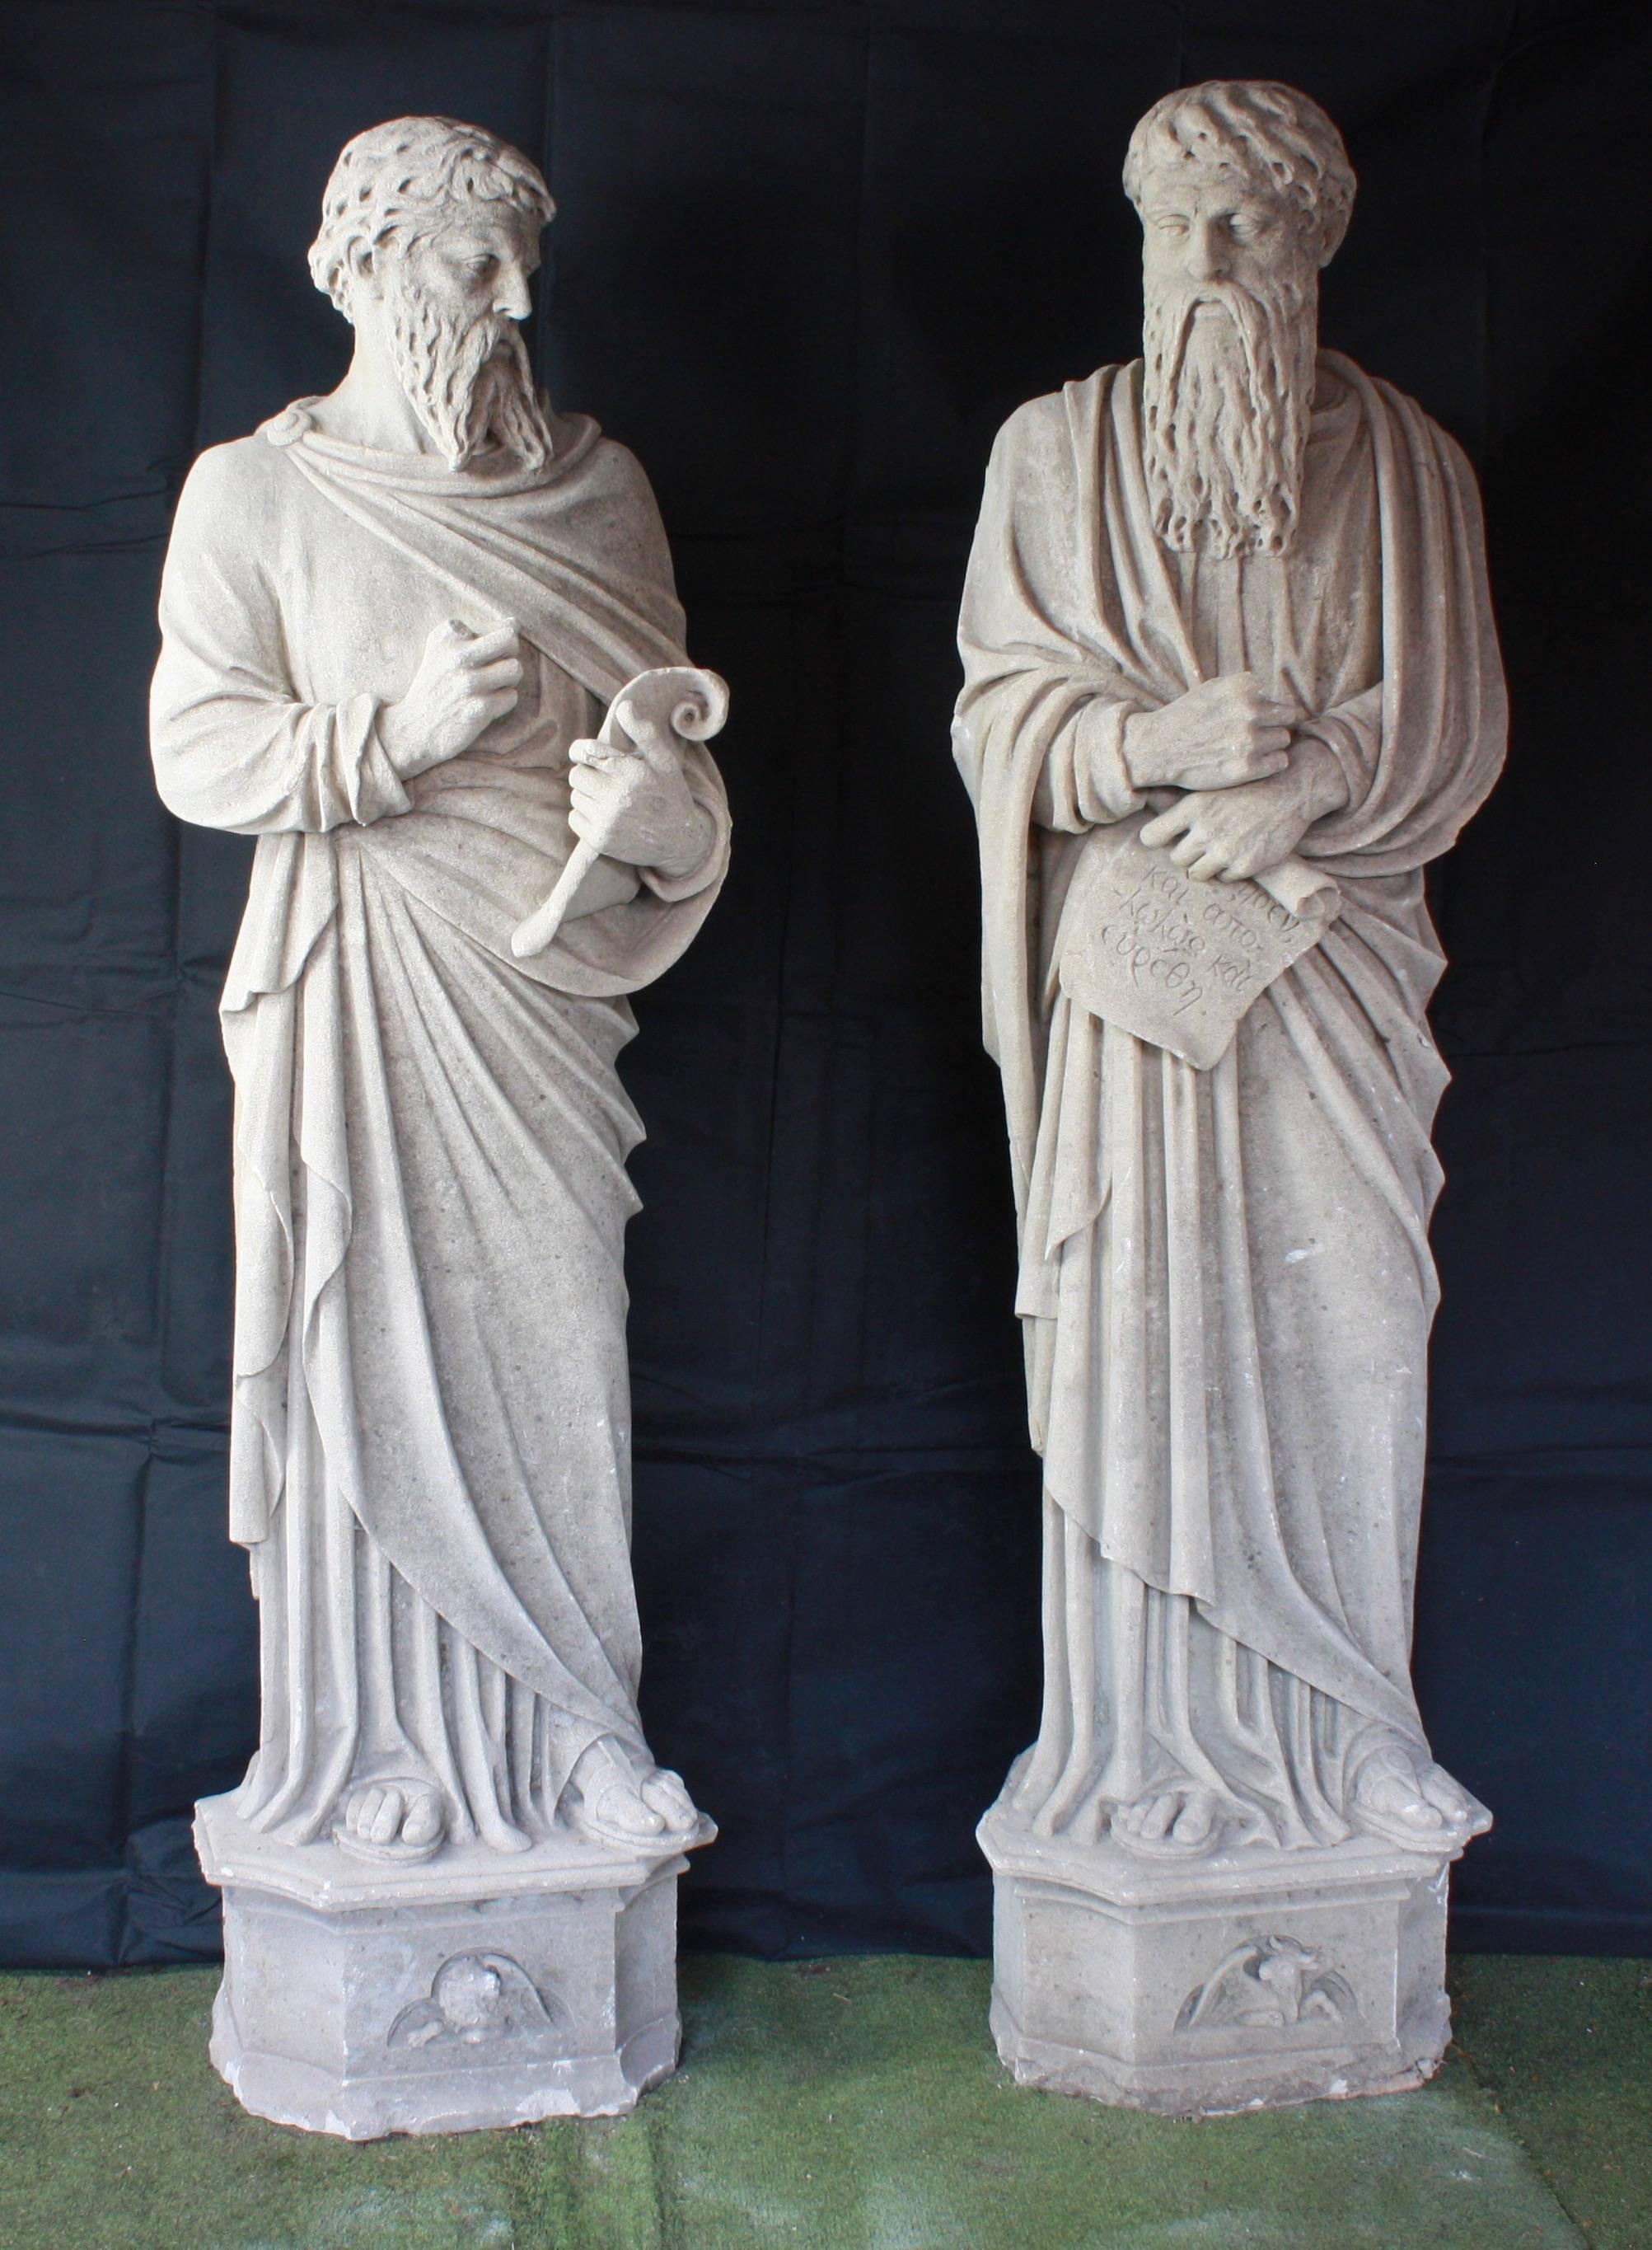 A stunning and monumental pair of carved stone statues, depicting Saint Mark and Saint Luke
English, circa 1820

The statues stand 2 meters tall, they were originally housed in the entrance of a church in Maida Vale London. The church was demolished